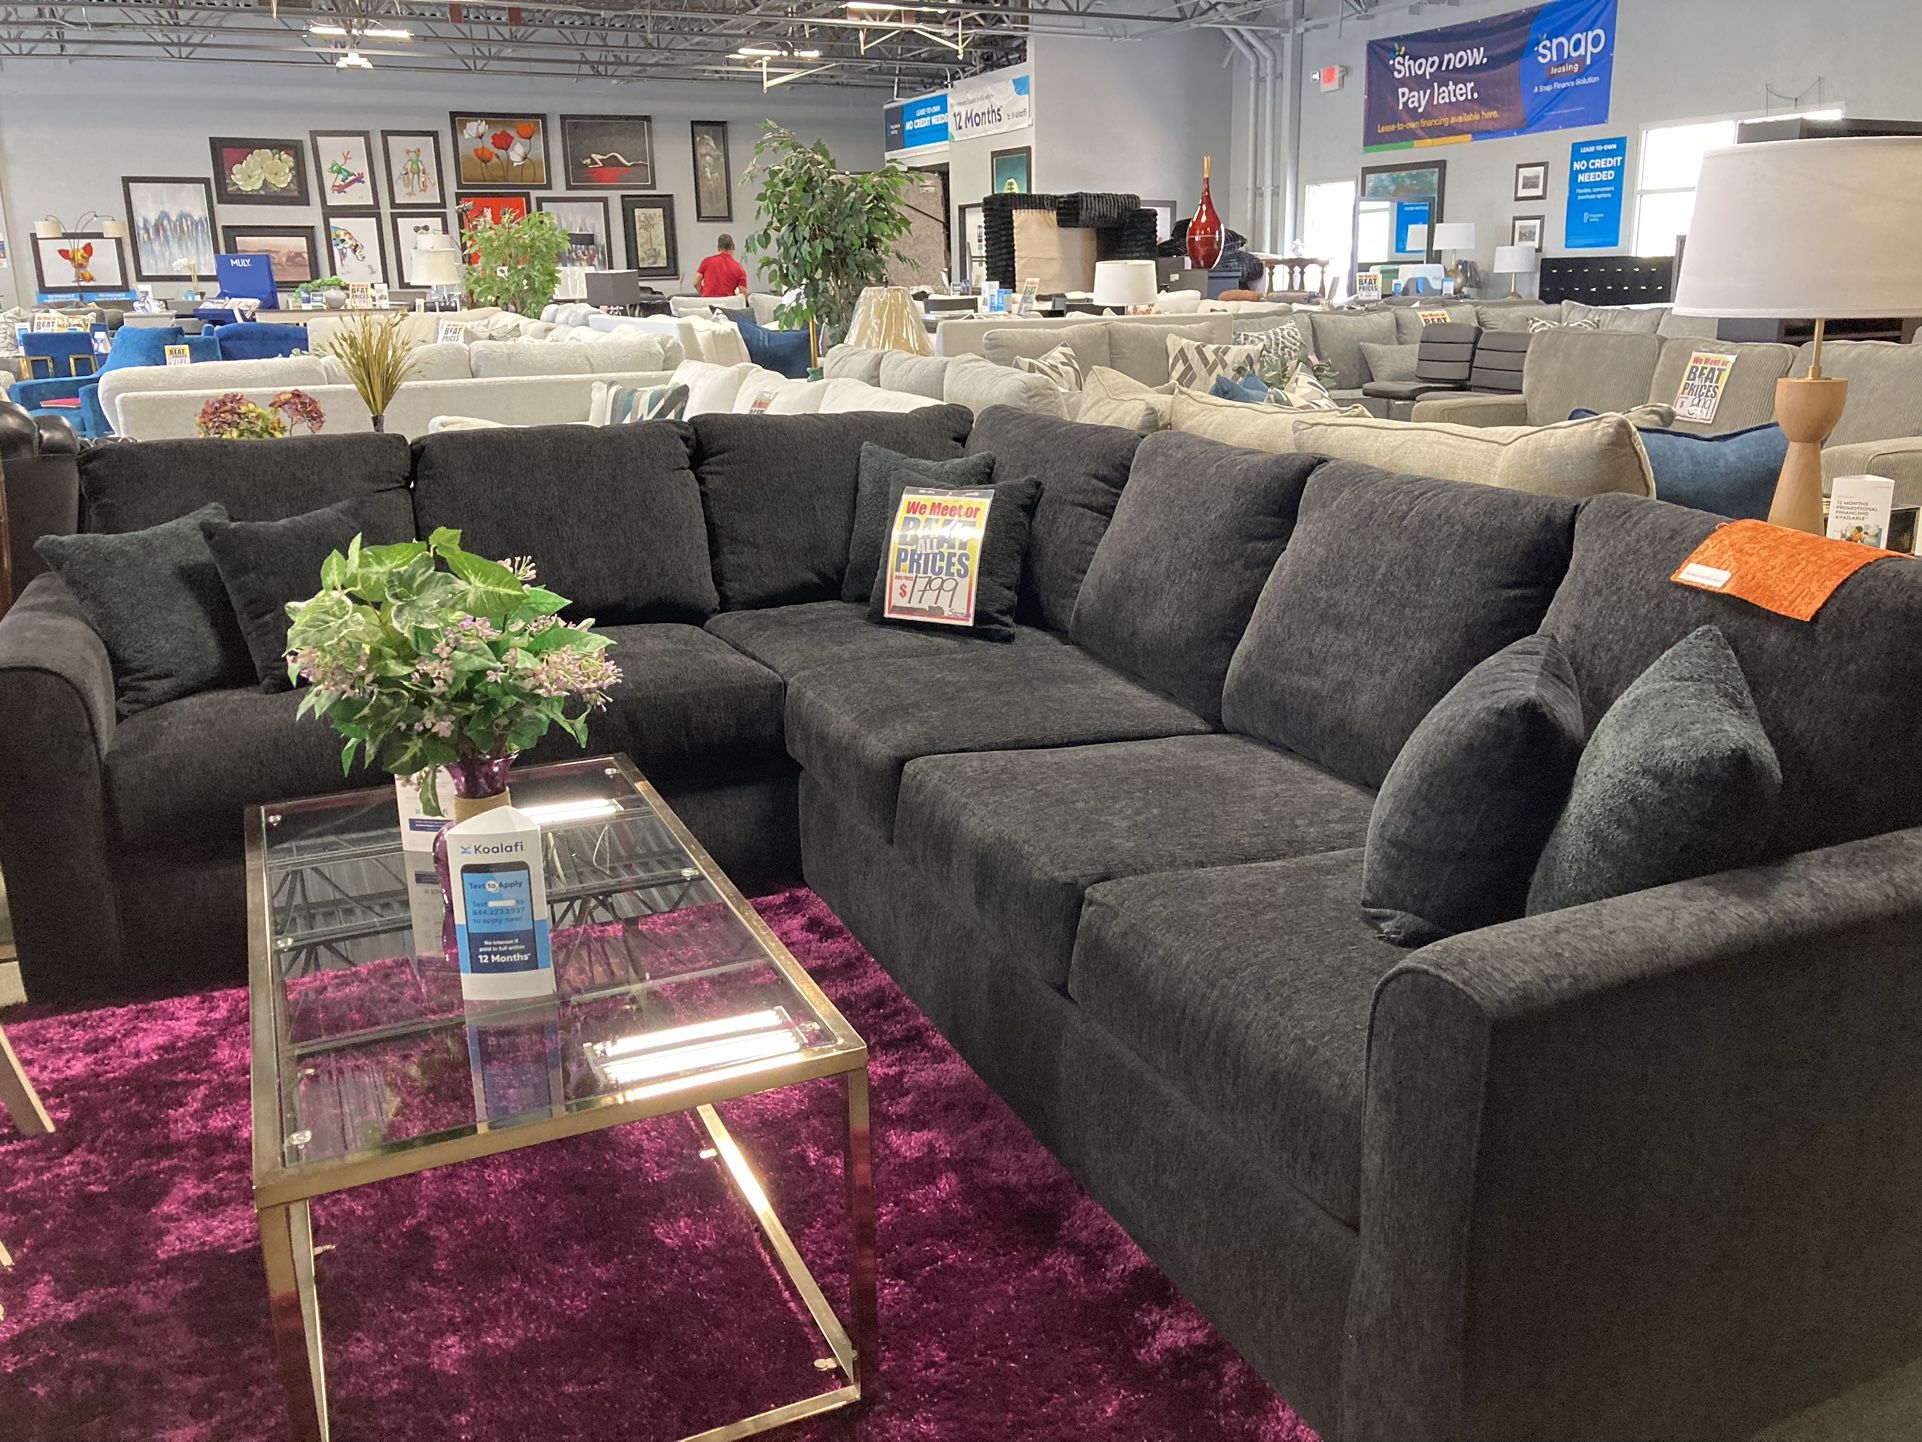 MEMORIAL DAY STARTS NOW💜❗️cozy customizable sectional🖤✨ $1,699